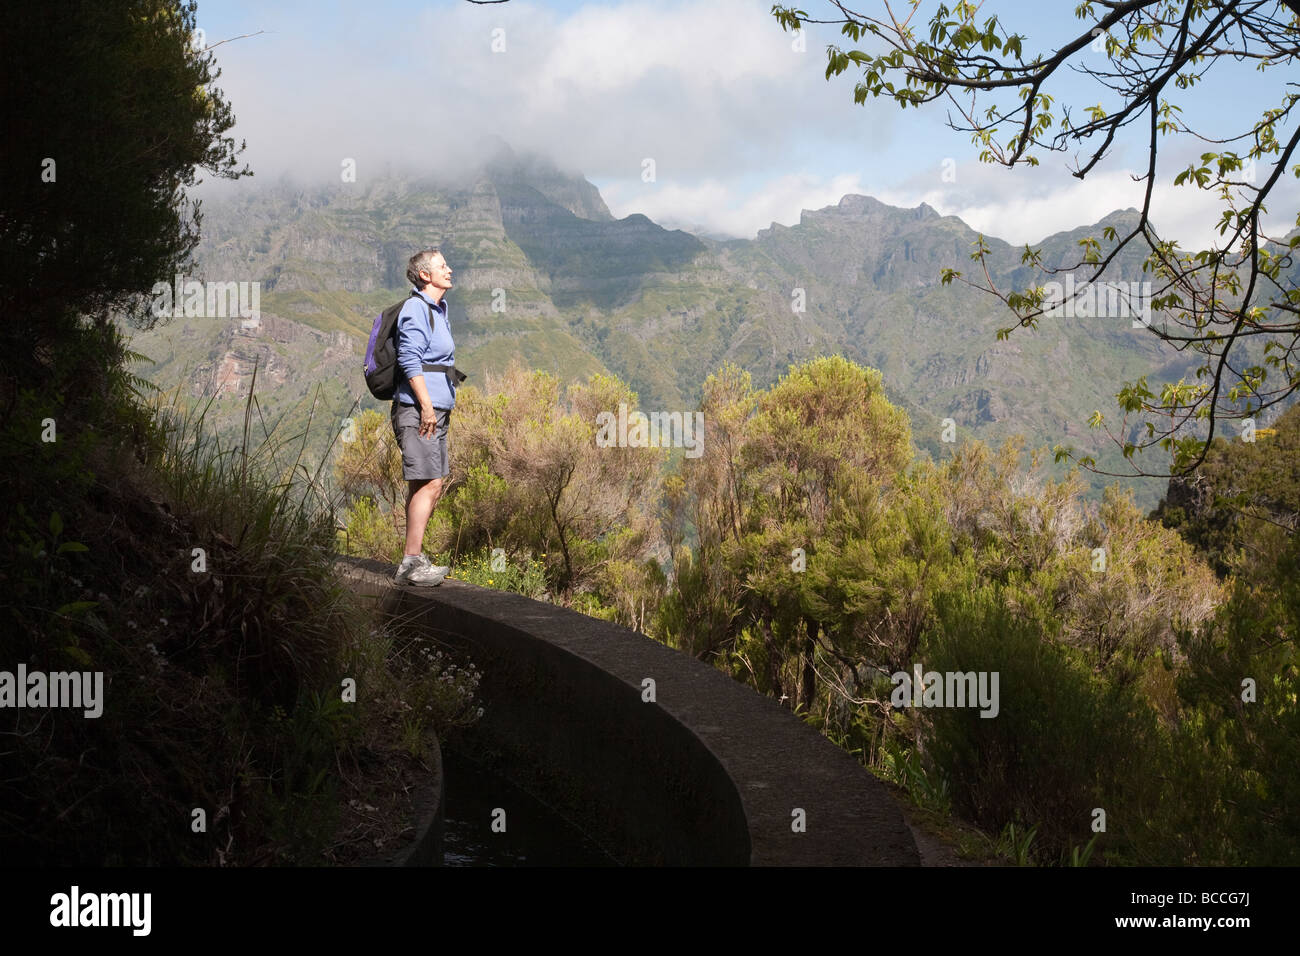 Levadas, water irrigation channels, on the island of Madeira are now used by walkers. Levada das Rabacas Encumenda Stock Photo